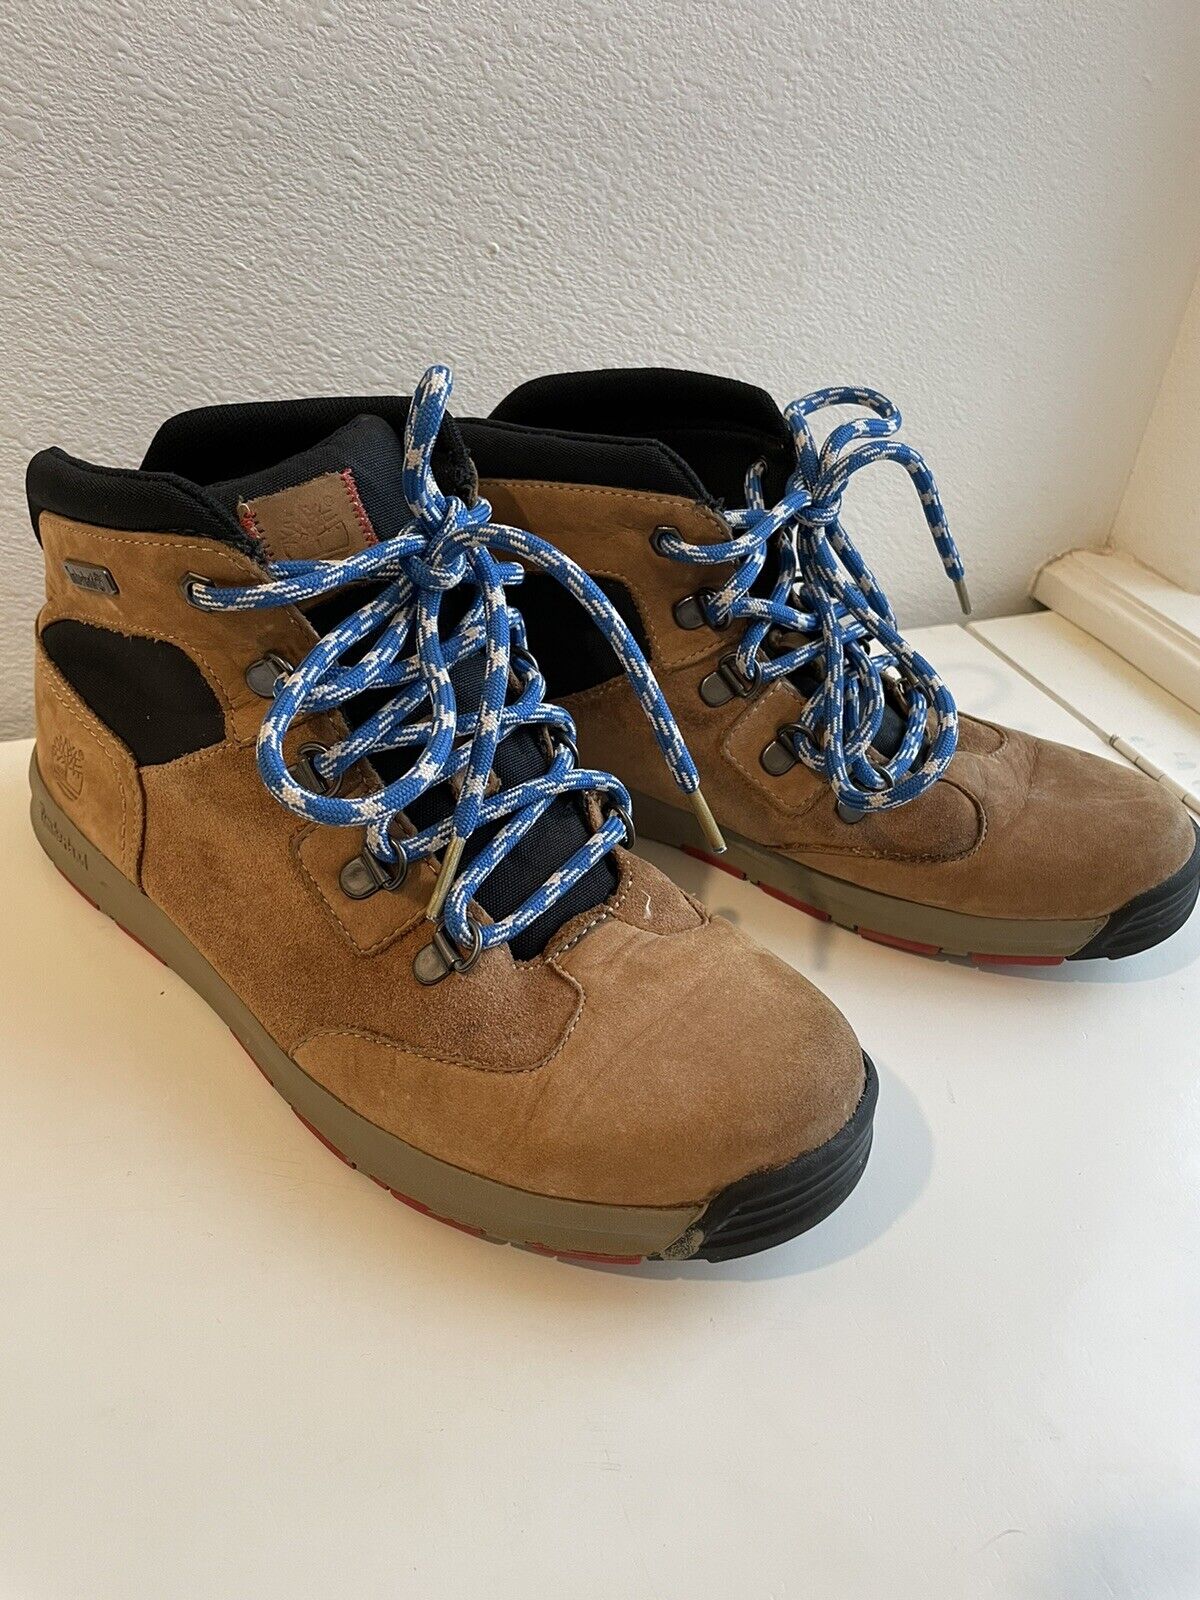 Timberland Scramble Earthkeepers Boots Boys Size 6.5 Tan Hiking Outdoor | eBay